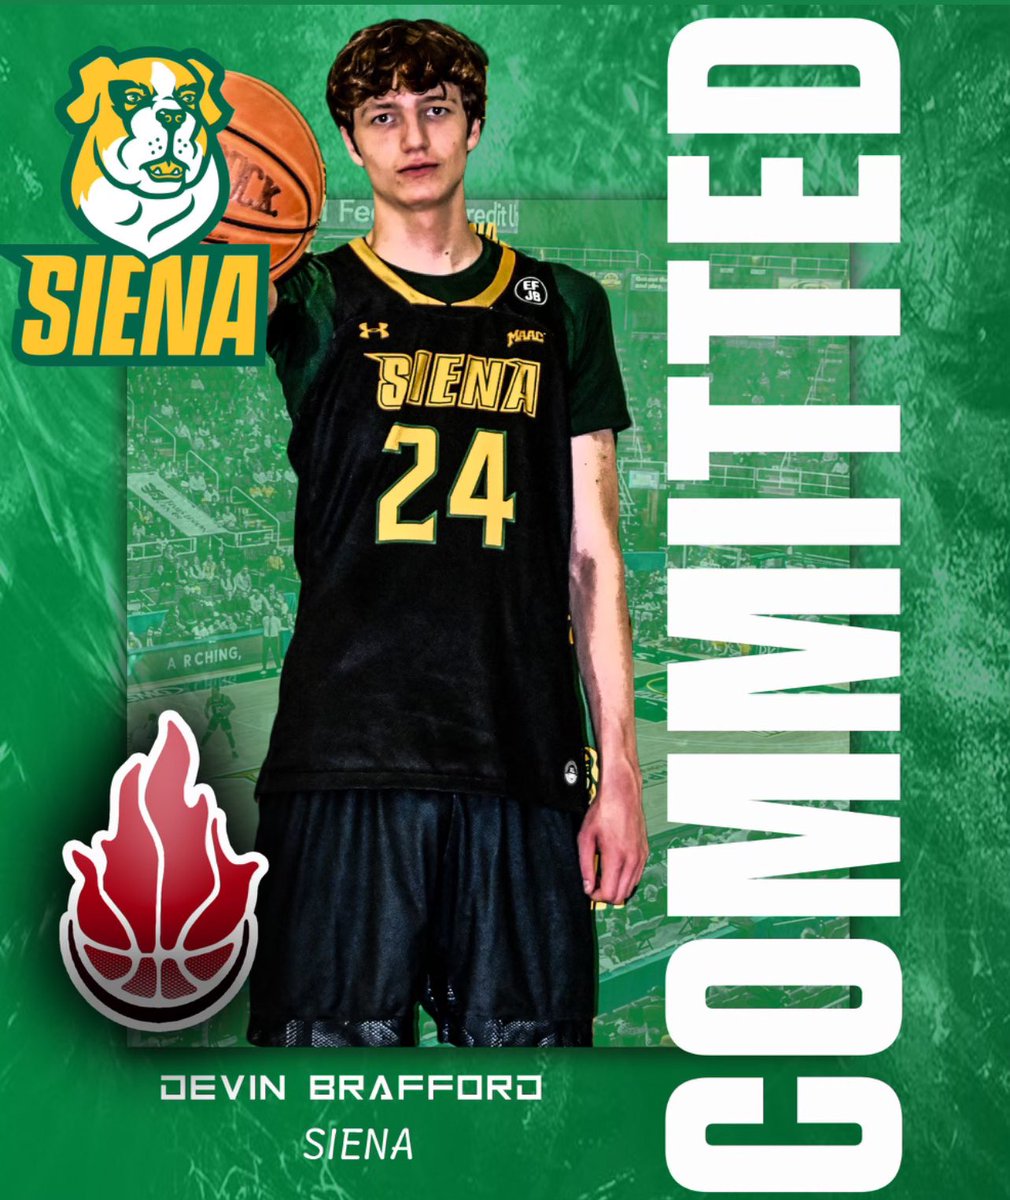 ANOTHER ONE OFF THE BOARD🔥🏀 Congratulations to 7’ Big Man @DevinBrafford2 on His Commitment to @SienaMBB Devin Makes the 9th Player to Commit from the Diamond Doves @OvertimeElite And the 11th Player from PHH Prep to Go Division 1 @TorWatts @AdamFinkelstein @VerbalCommits